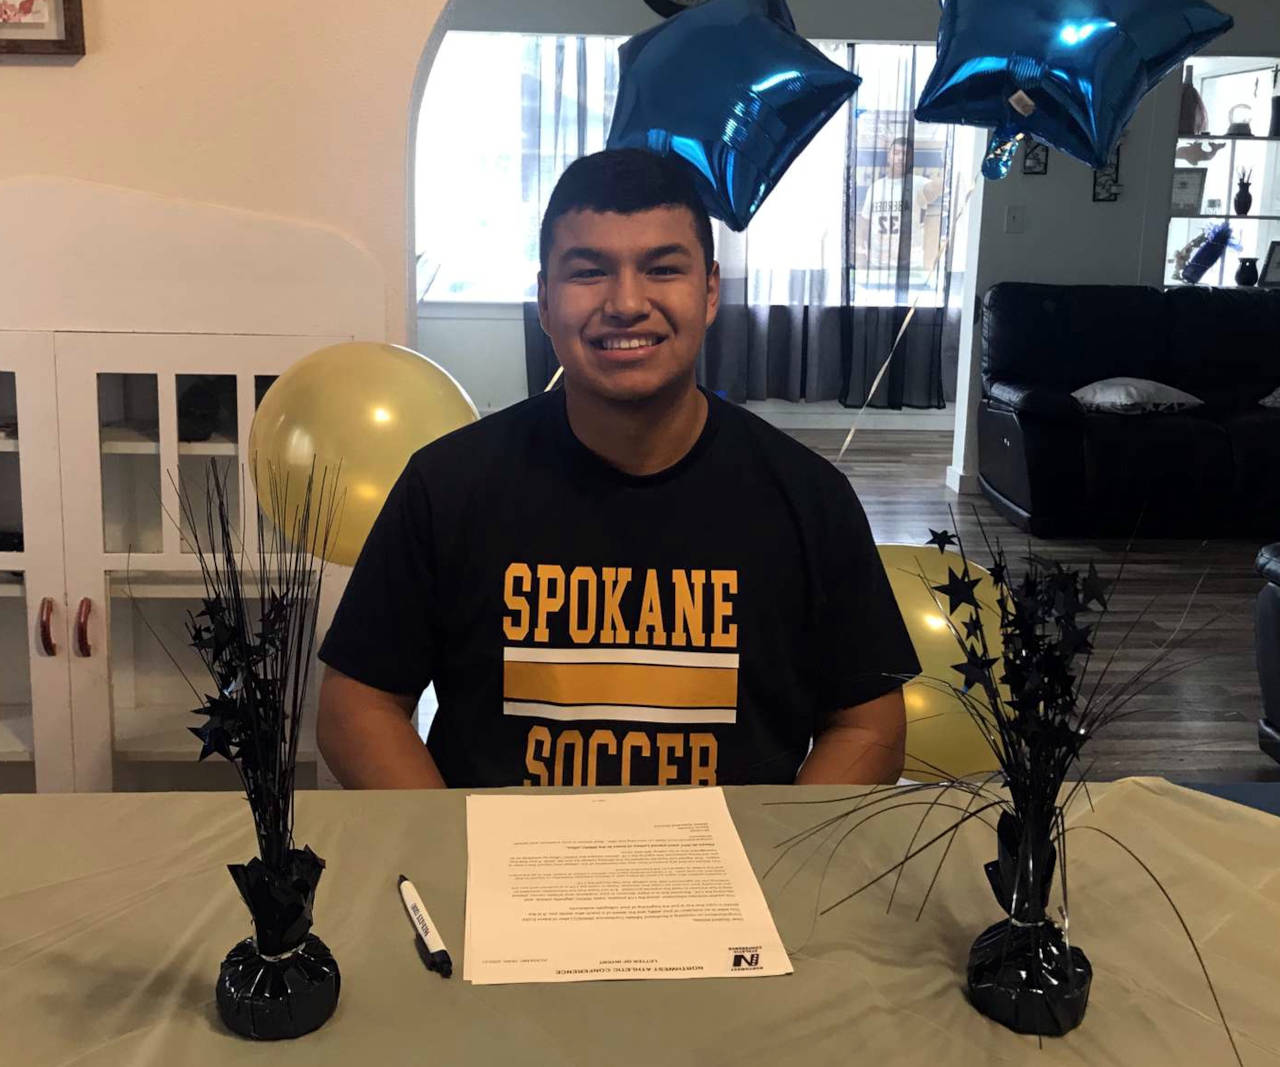 Aberdeen’s Romeo Sanchez poses for a photo after signing a National Letter of Intent to play soccer for Spokane Community College on June 9. (Photo courtesy of Aberdeen High School)